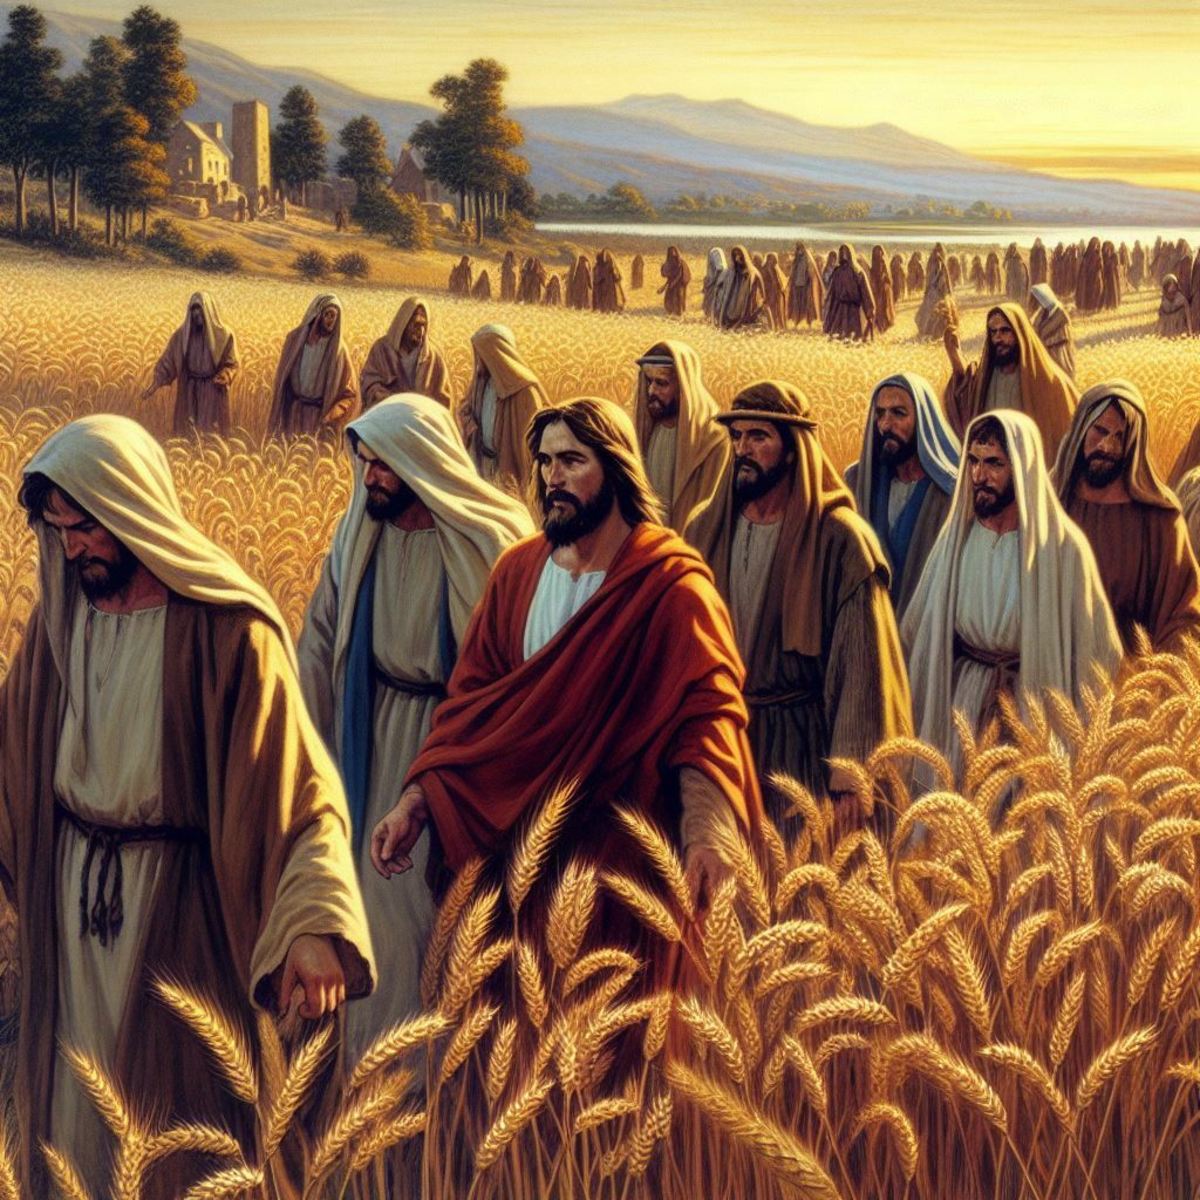 Jesus Challenges the Questions Raised About Why His Disciples Did Not Fast as Other ‘Righteous’ Followers Did